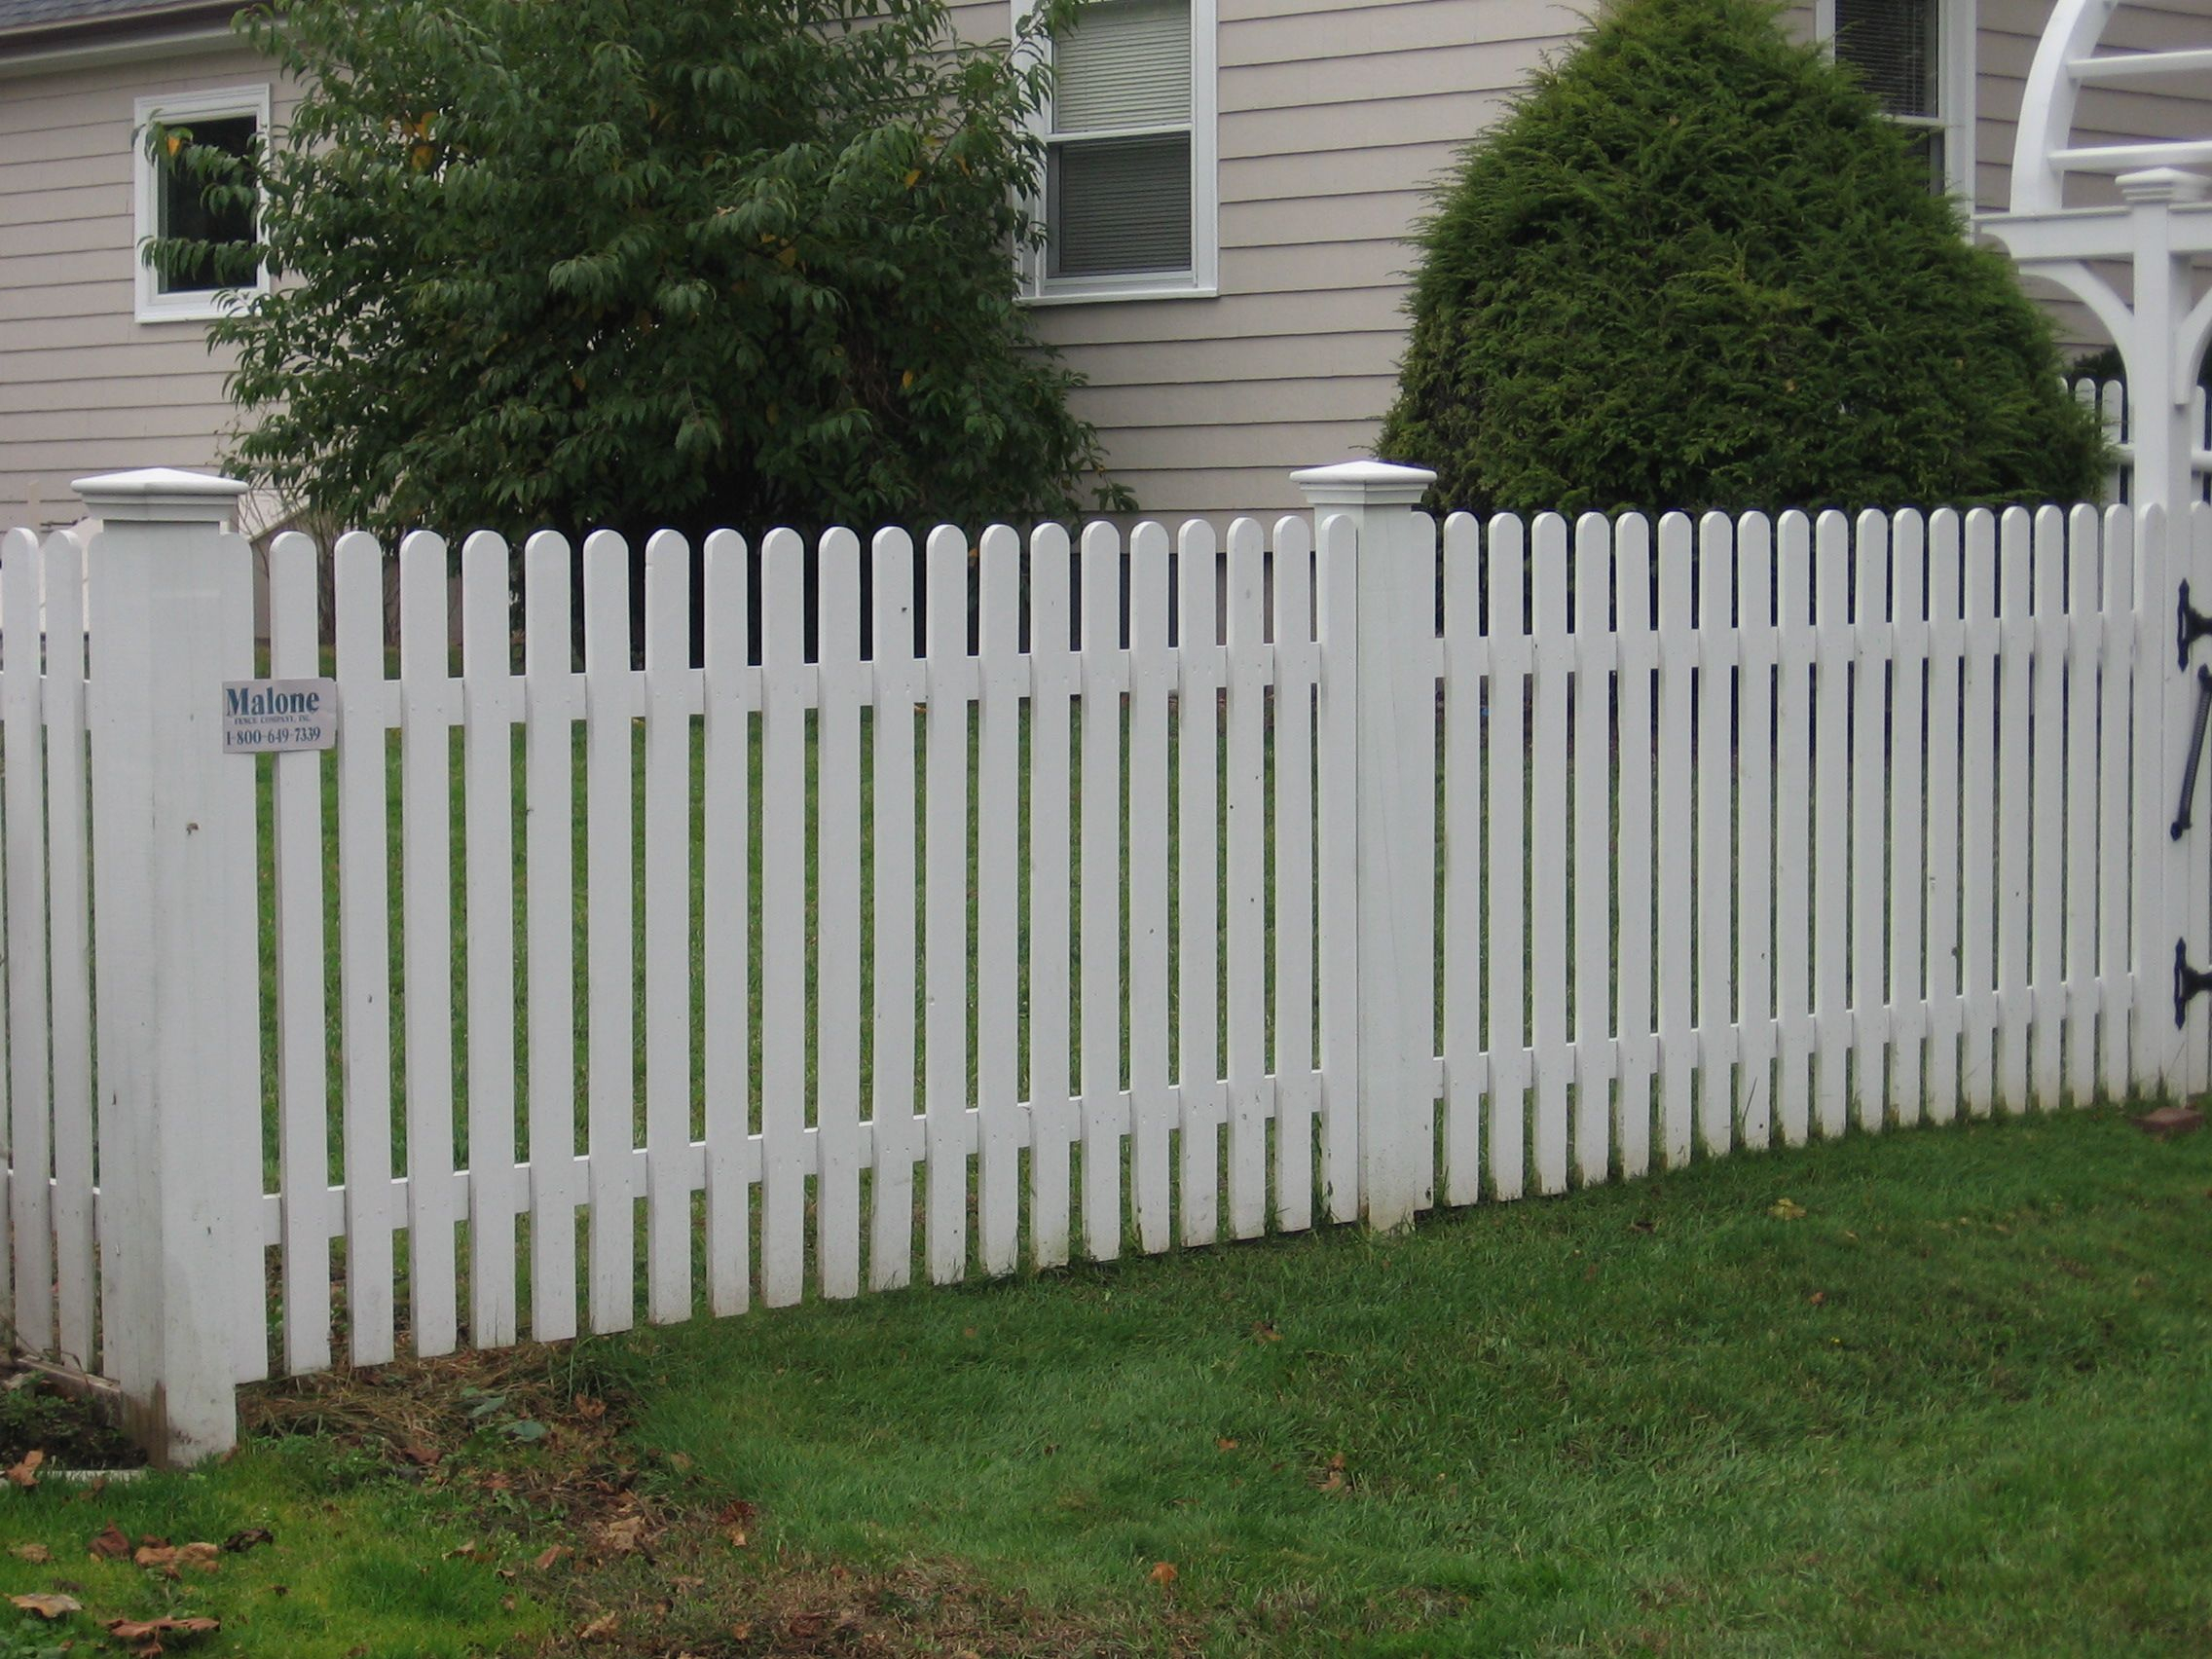 Picket Fence Design And Installation North Shore Boston Malone pertaining to dimensions 2272 X 1704